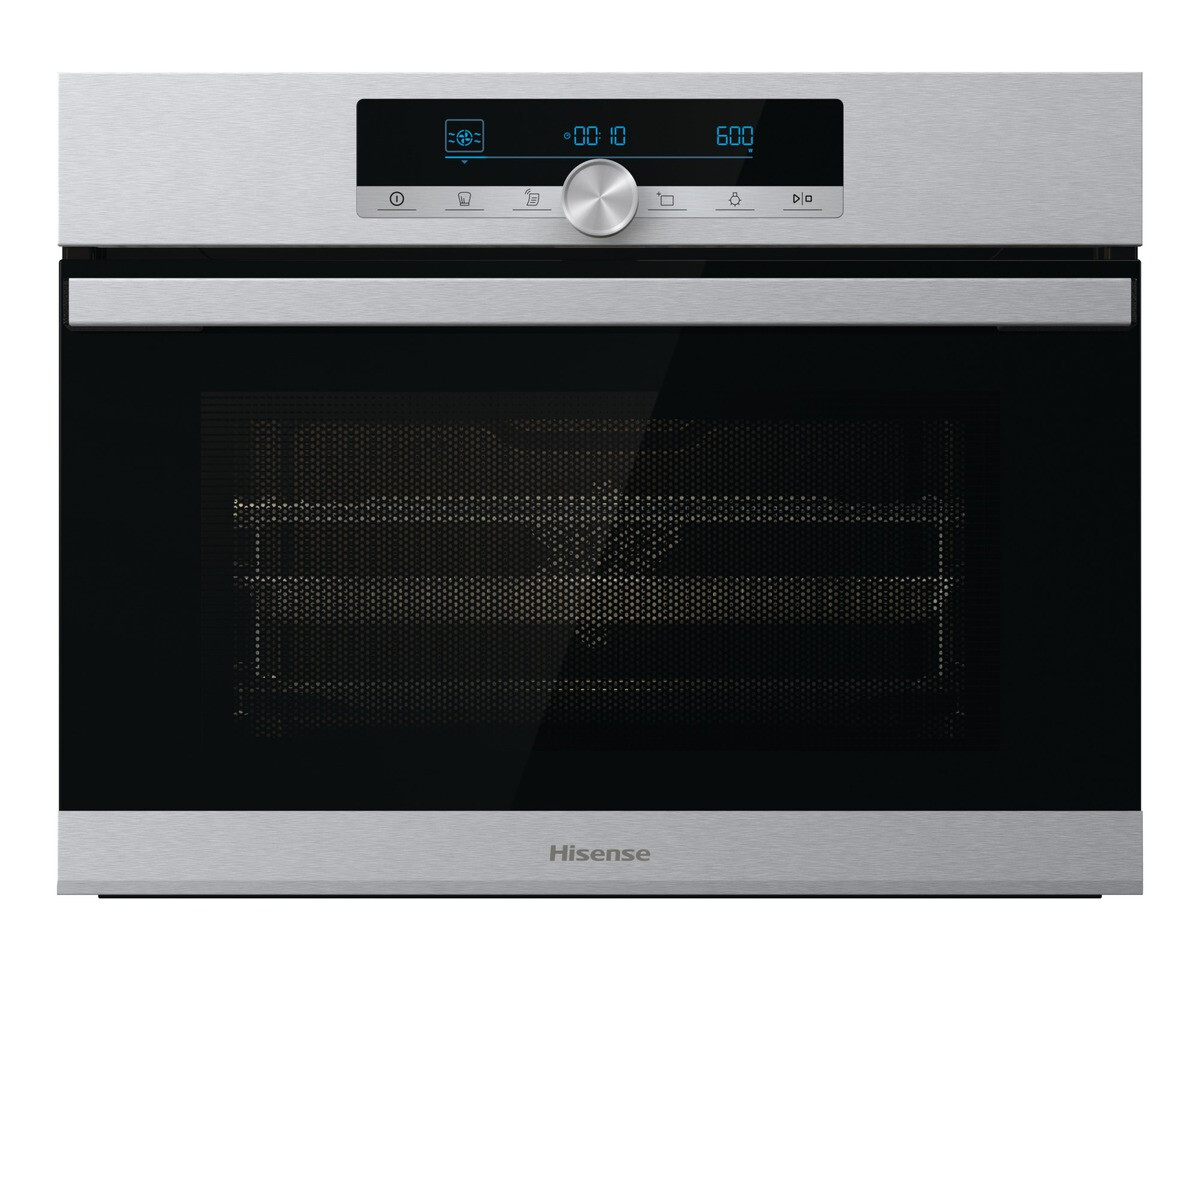 Hisense BIM44321AX Built In Compact Electric Single Oven with Microwave Function – Stainless Steel #363404